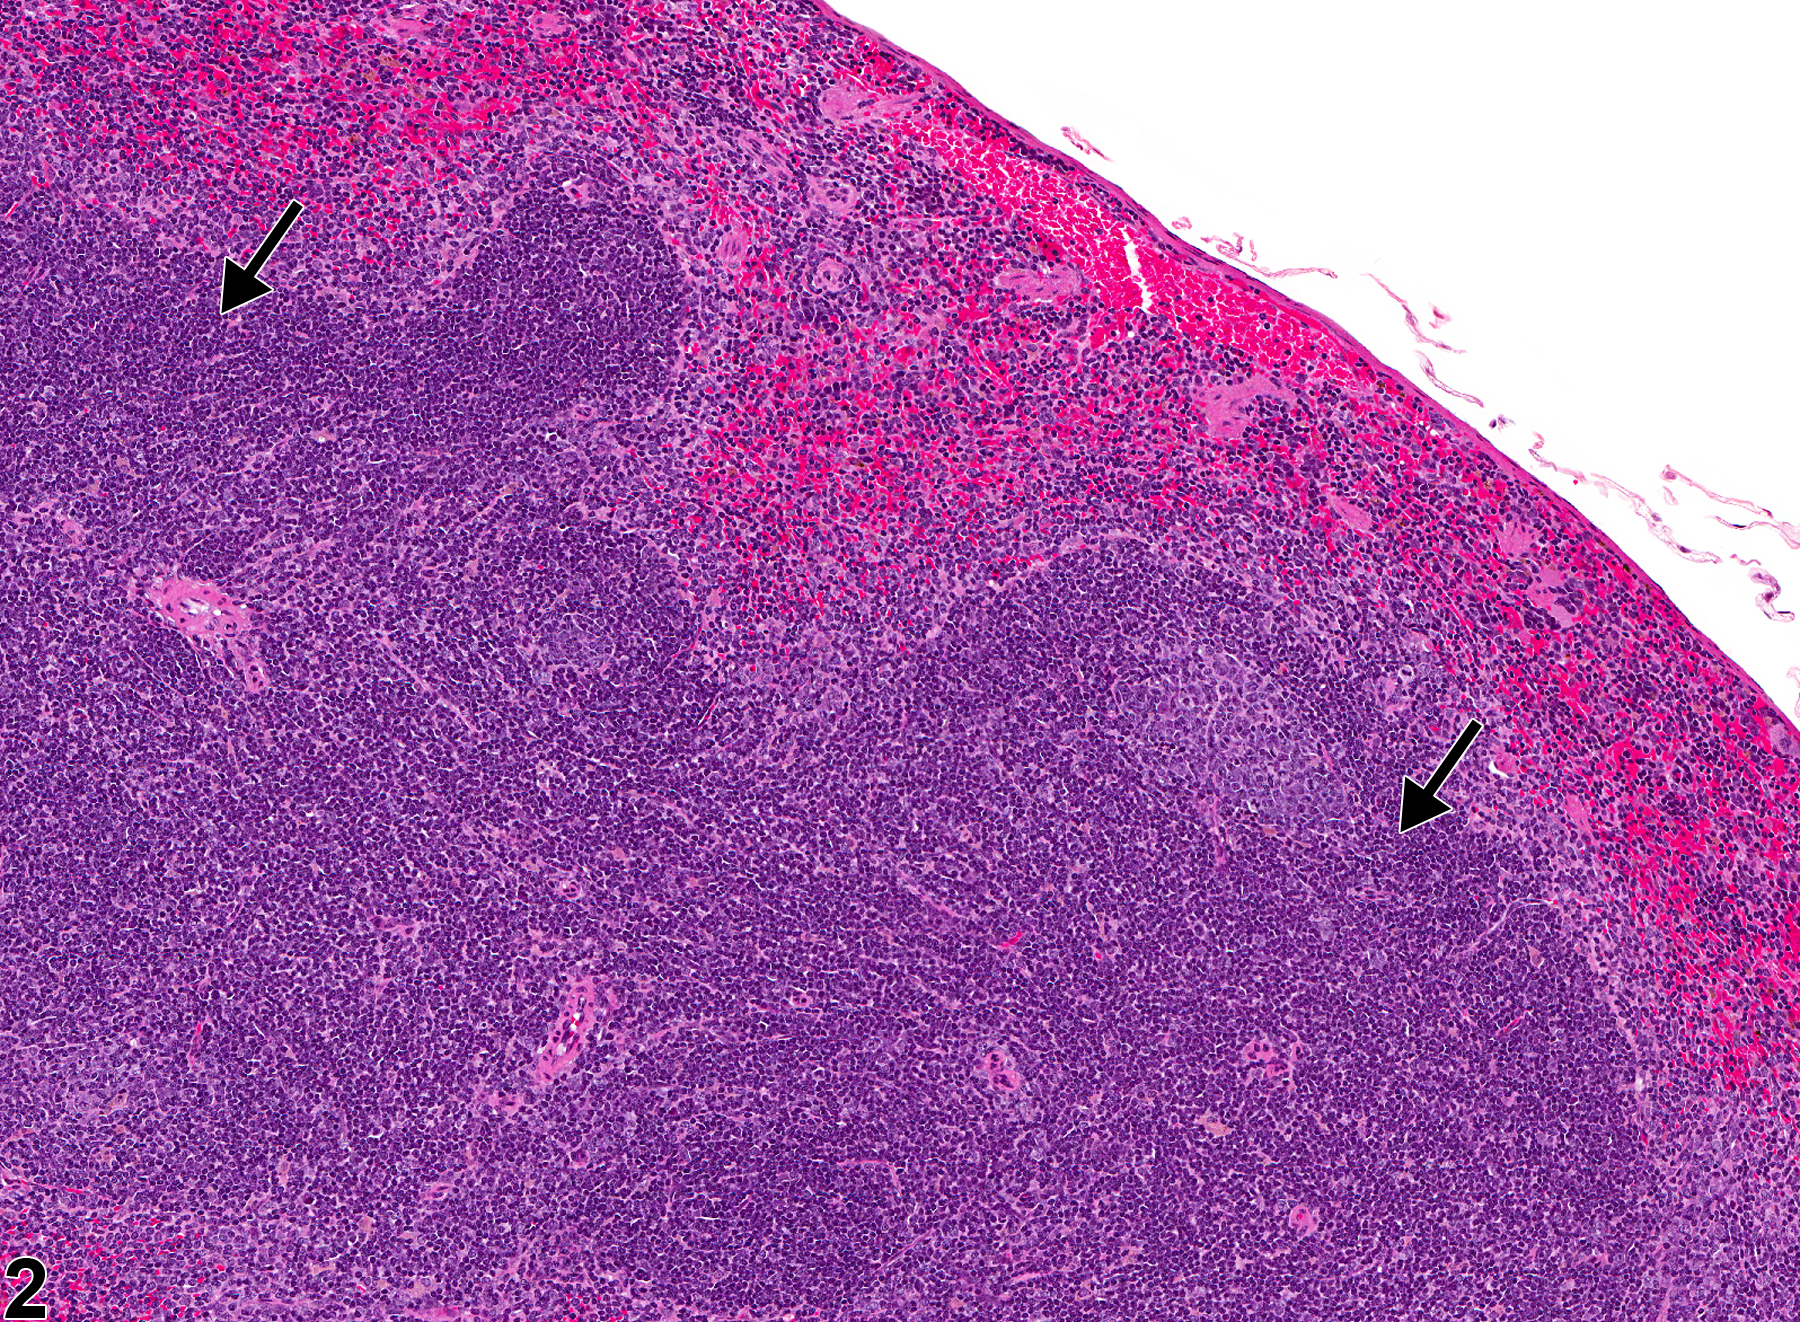 Image of hyperplasia, lymphocyte in the spleen from a male B6C3F1/N mouse in a chronic study